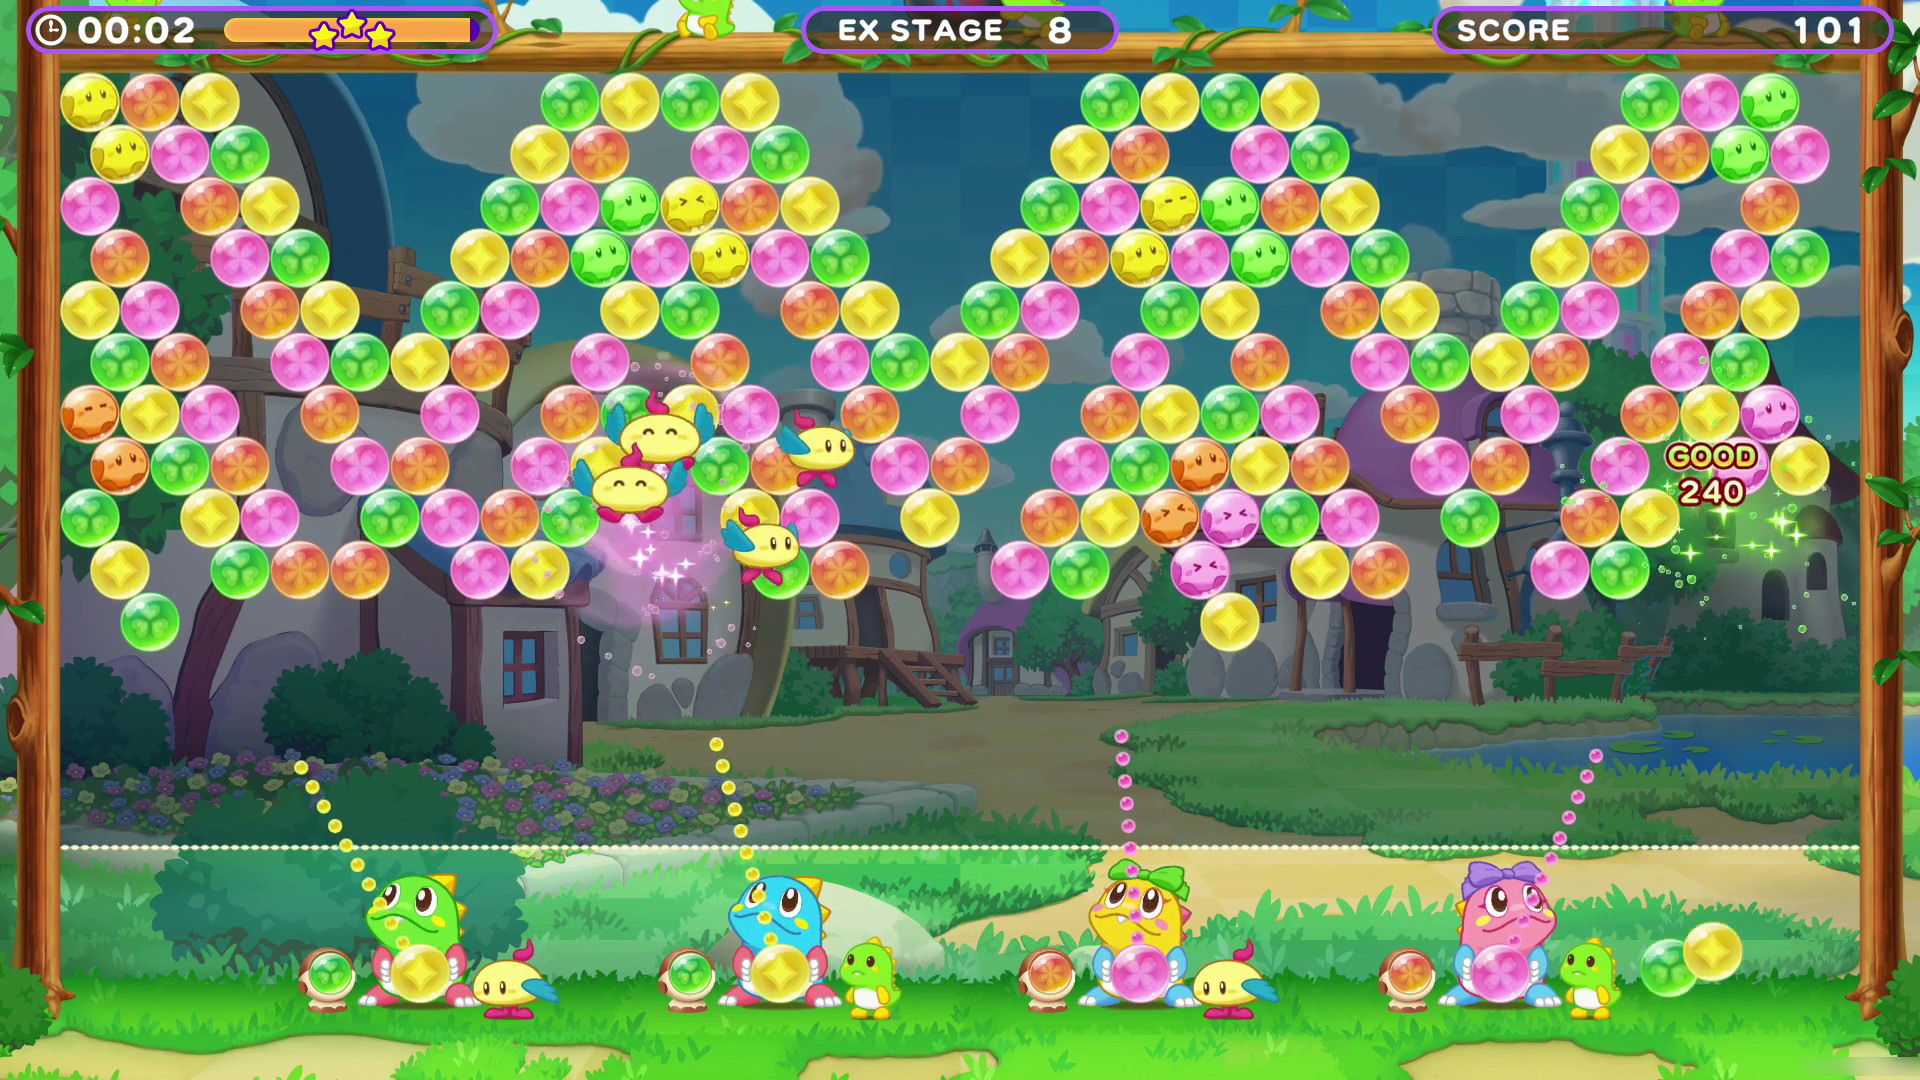 Puzzle Bobble, the Original Bubble-Popping Game, Now On LINE